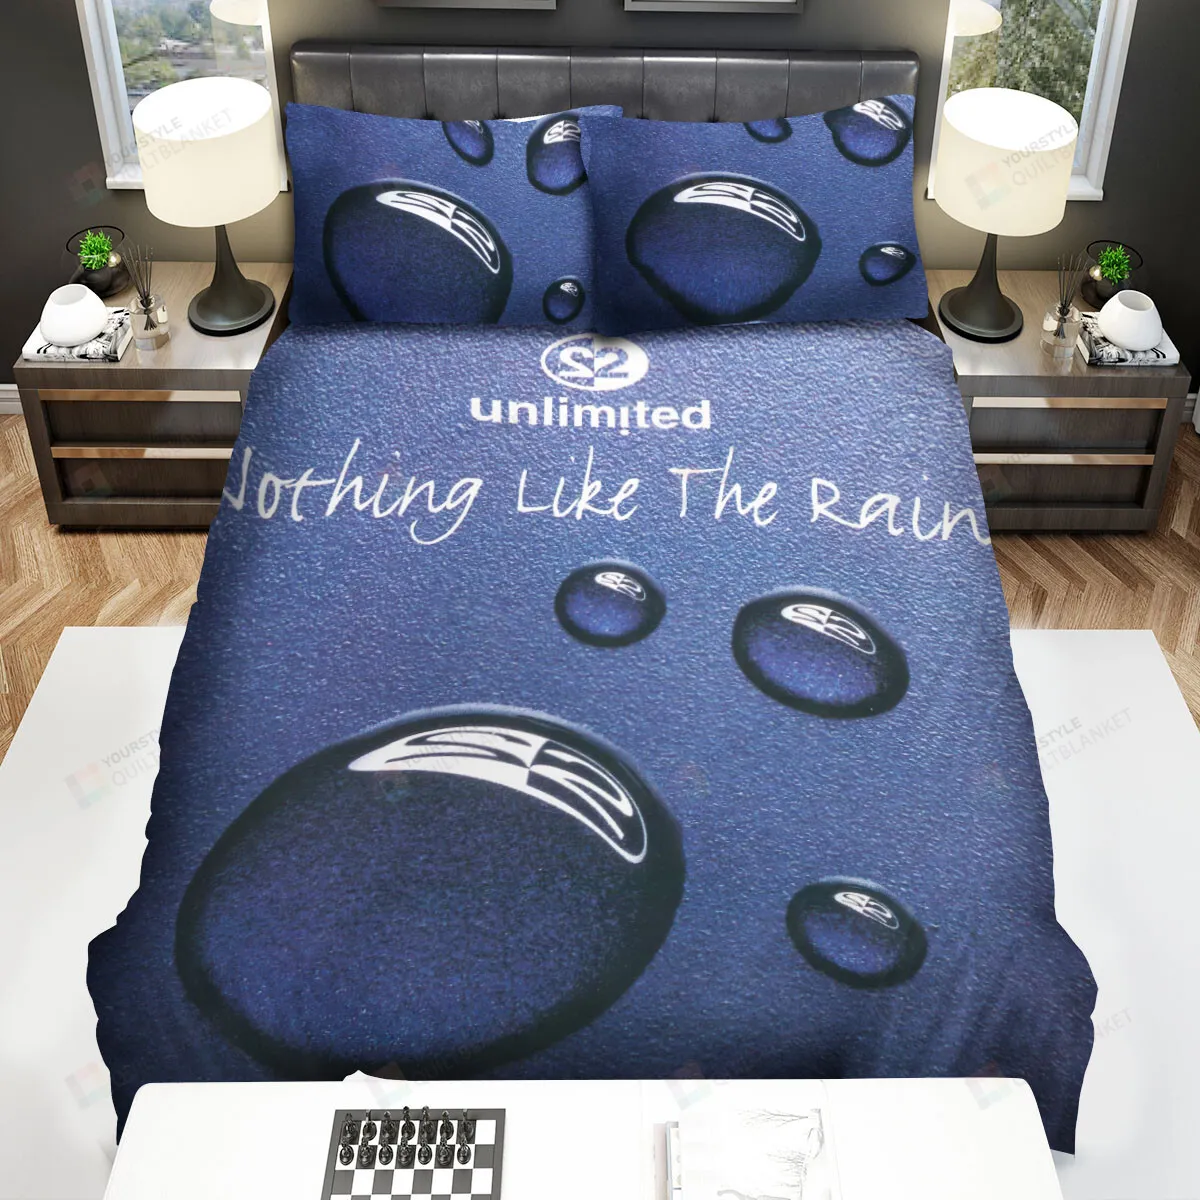 2 Unlimited Nothing Like The Rain Bed Sheets Spread Comforter Duvet Cover Bedding Sets